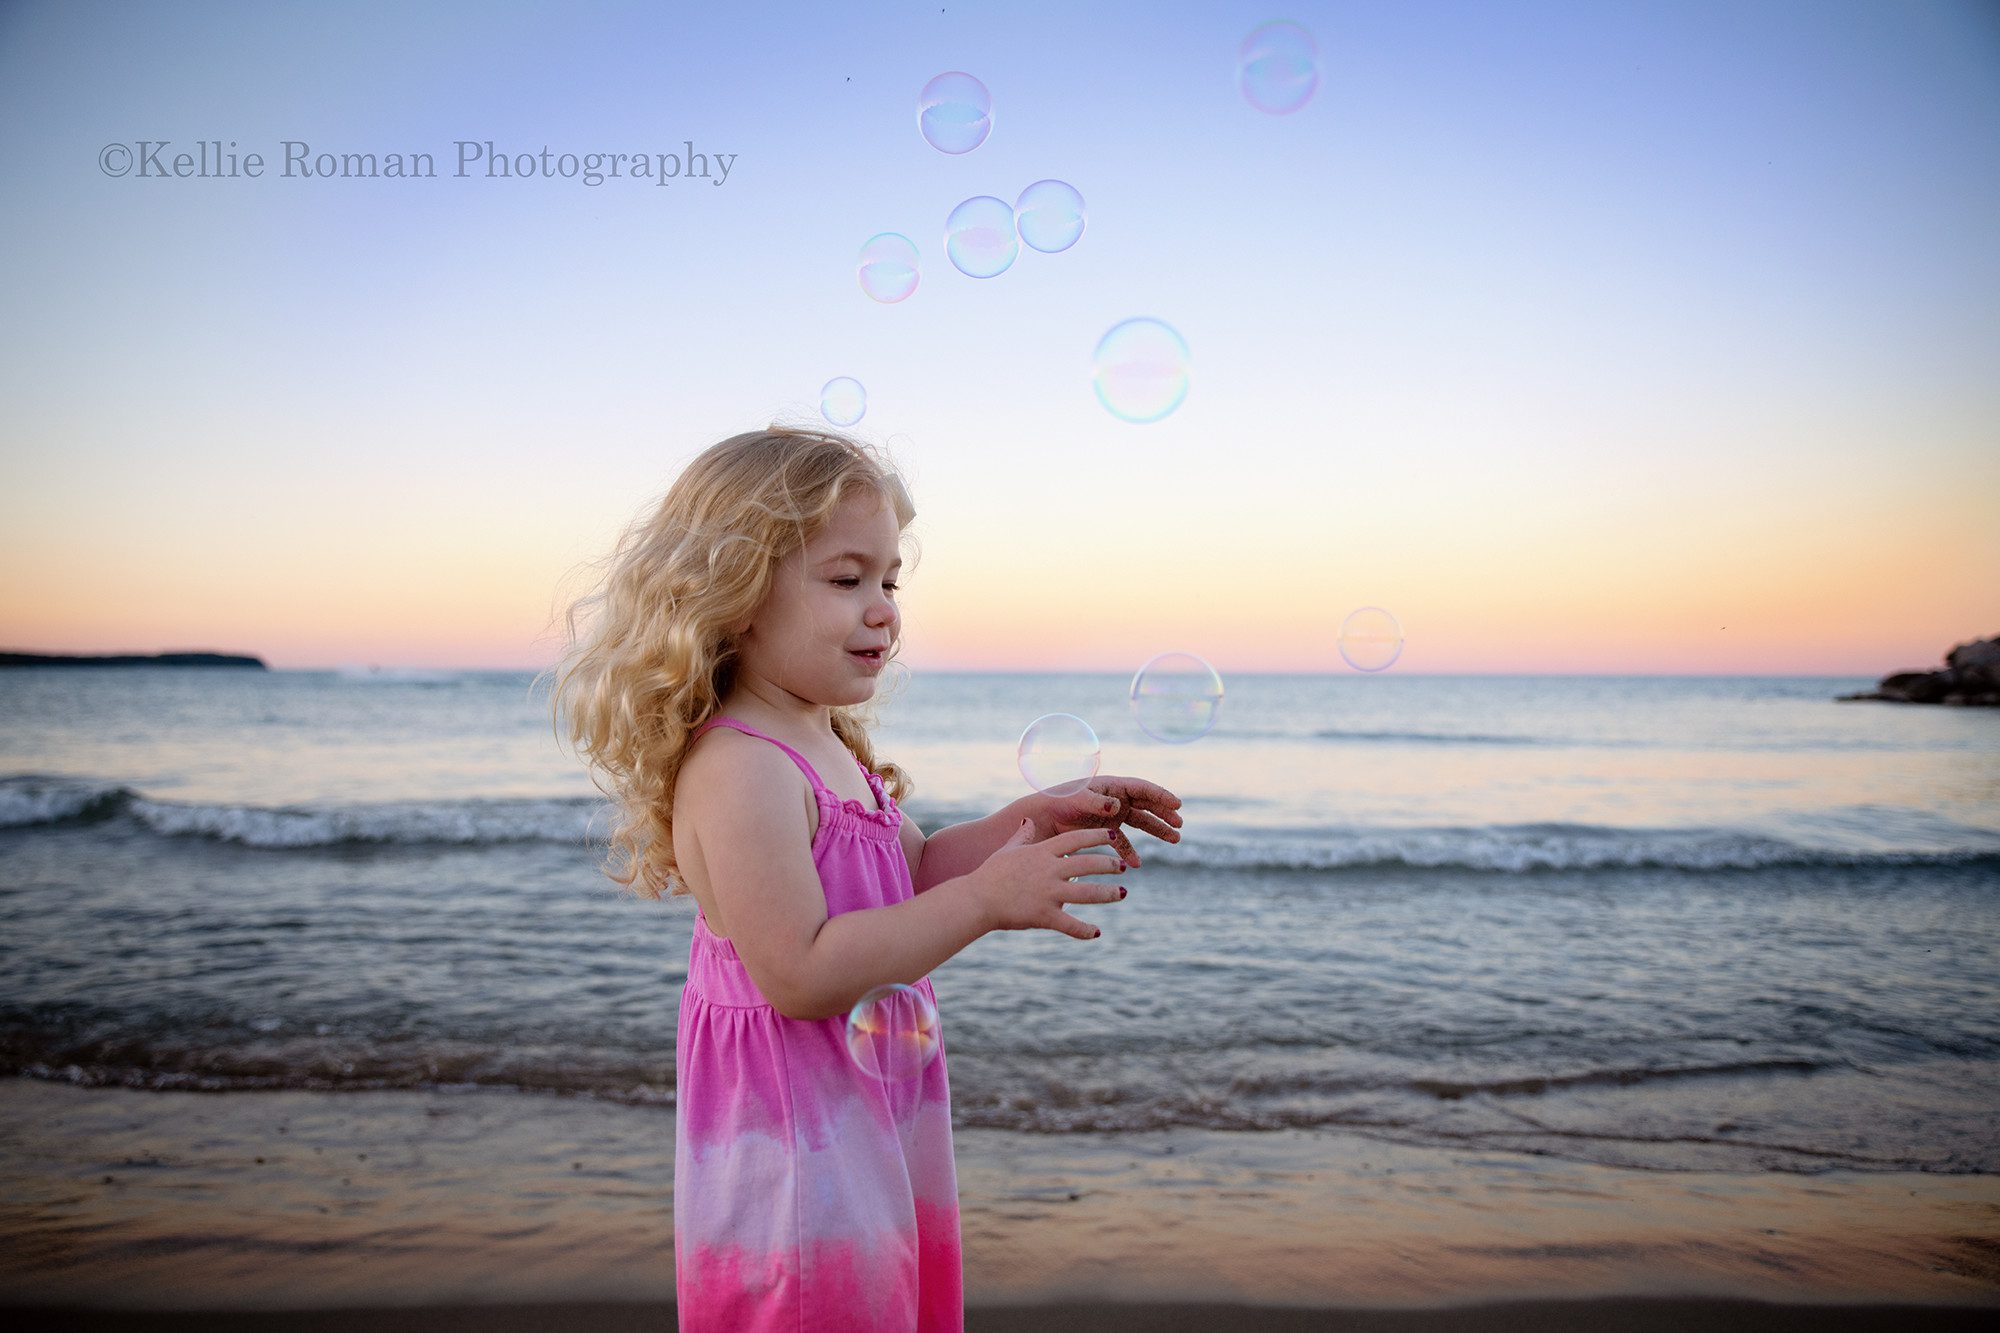 bubbles at the beach a three year old girl on a milwaukee beach wearing a pink dress is playing with bubbles floating through the air she has long curly blonde hair and the sky behind her is lit up with shades of pastel during sunset